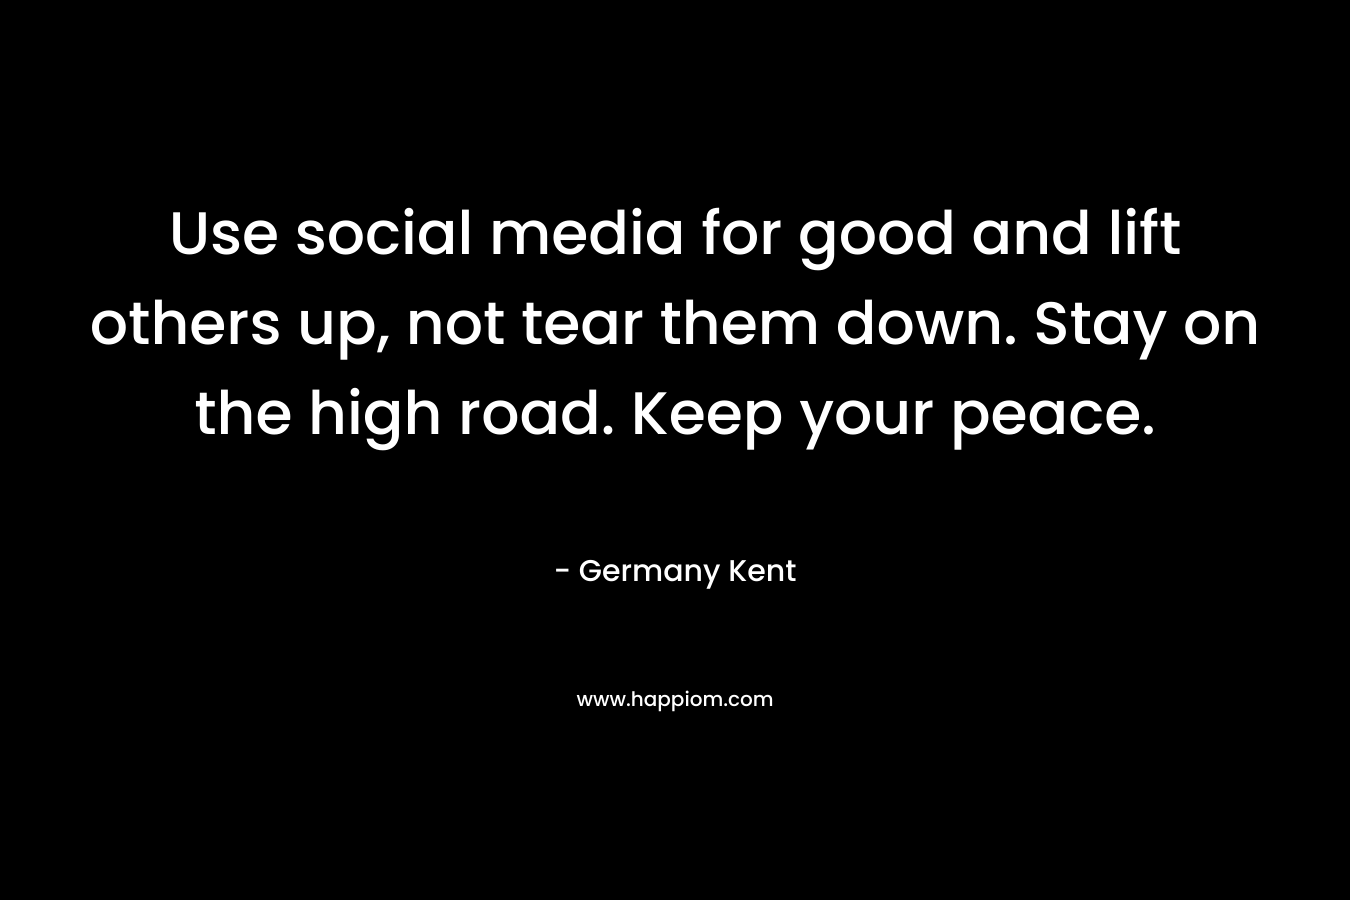 Use social media for good and lift others up, not tear them down. Stay on the high road. Keep your peace. – Germany Kent